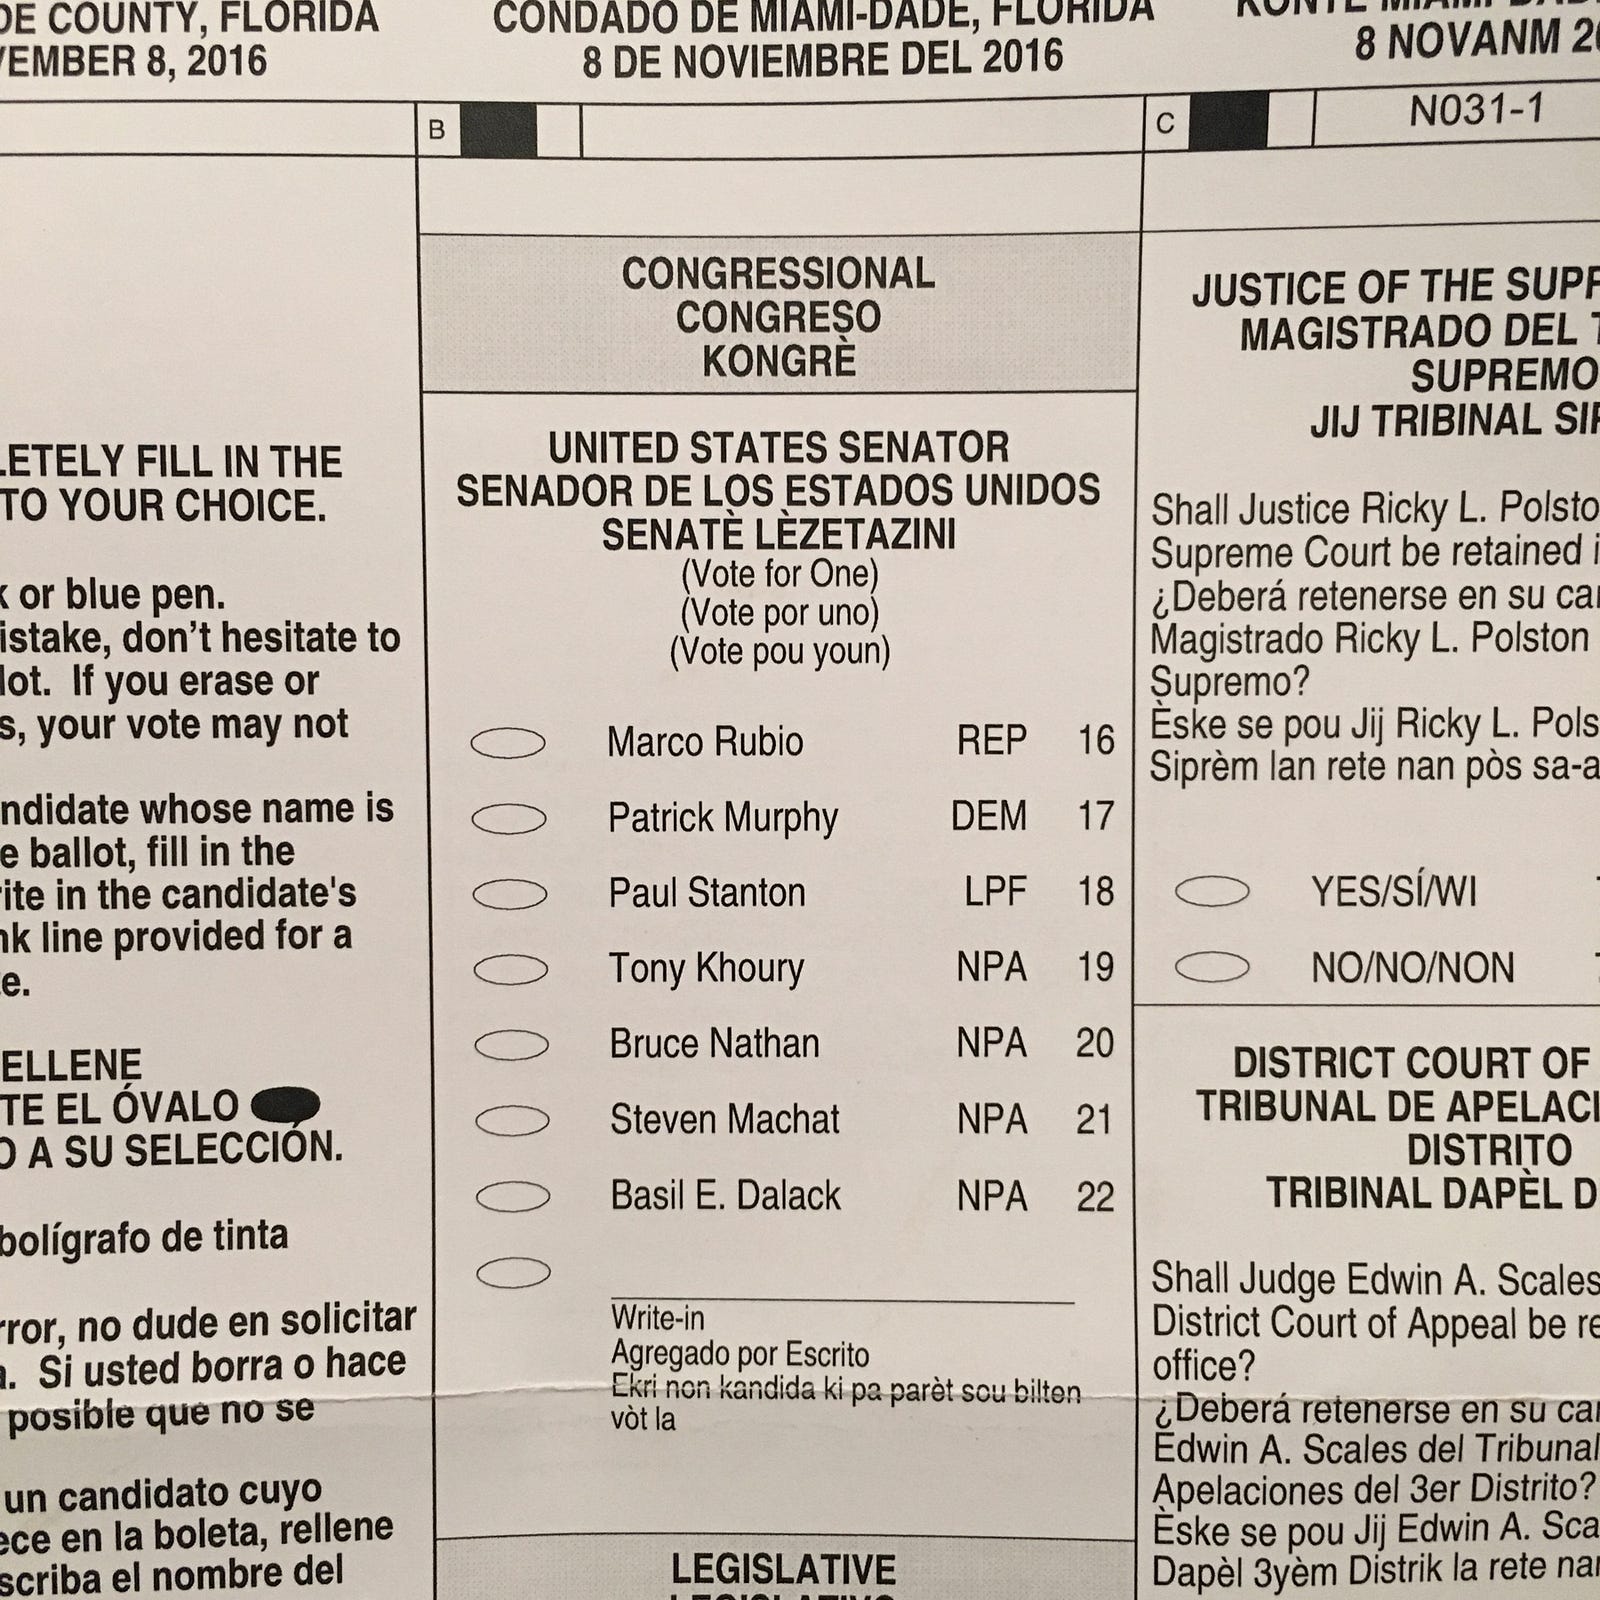 The Uninformed Voter’s Guide to the MiamiDade County Ballot